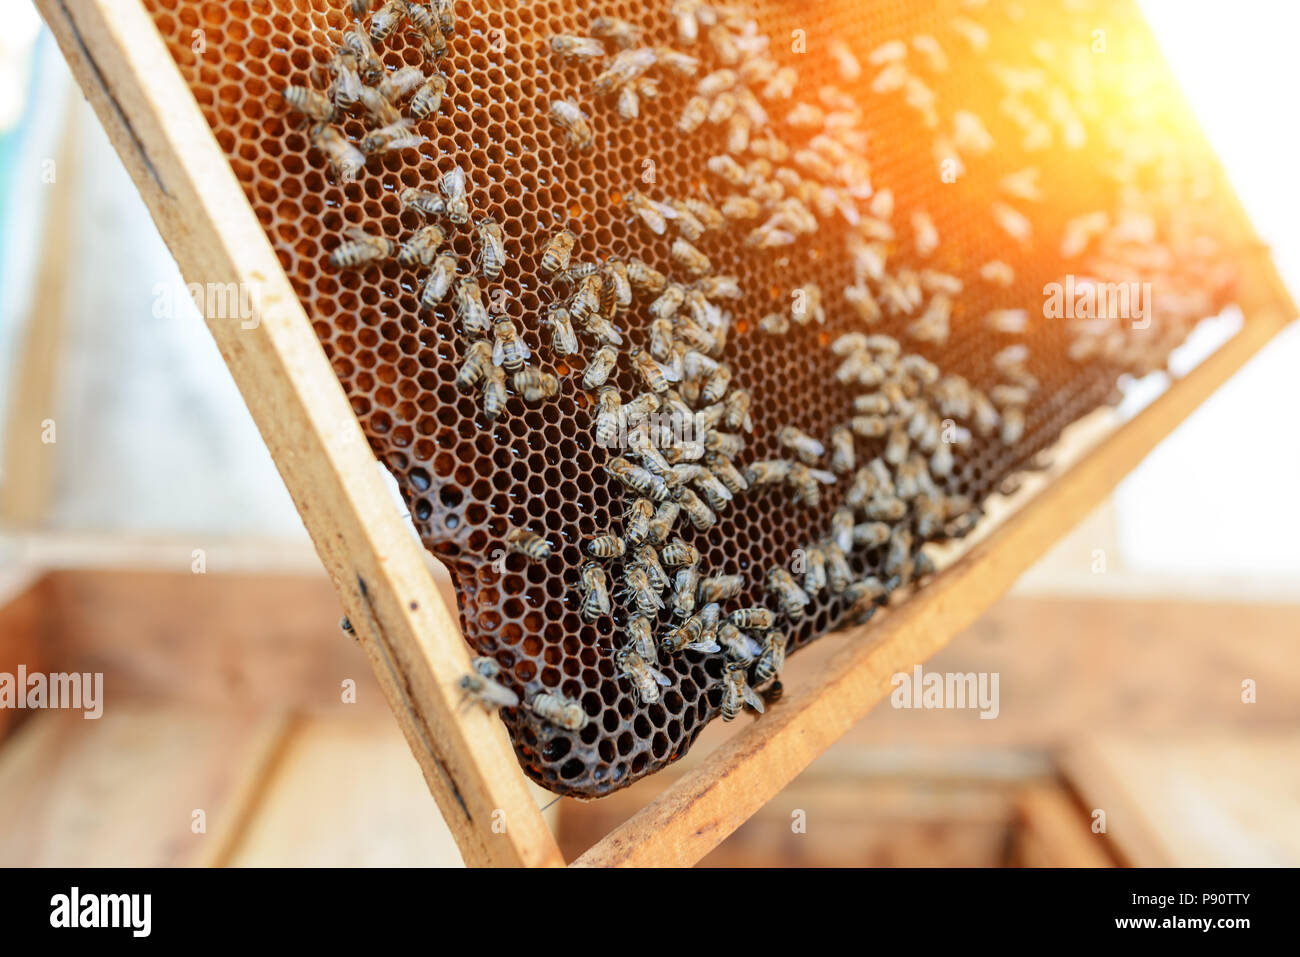 Beekeeper holding frame of honeycomb with bees. Stock Photo